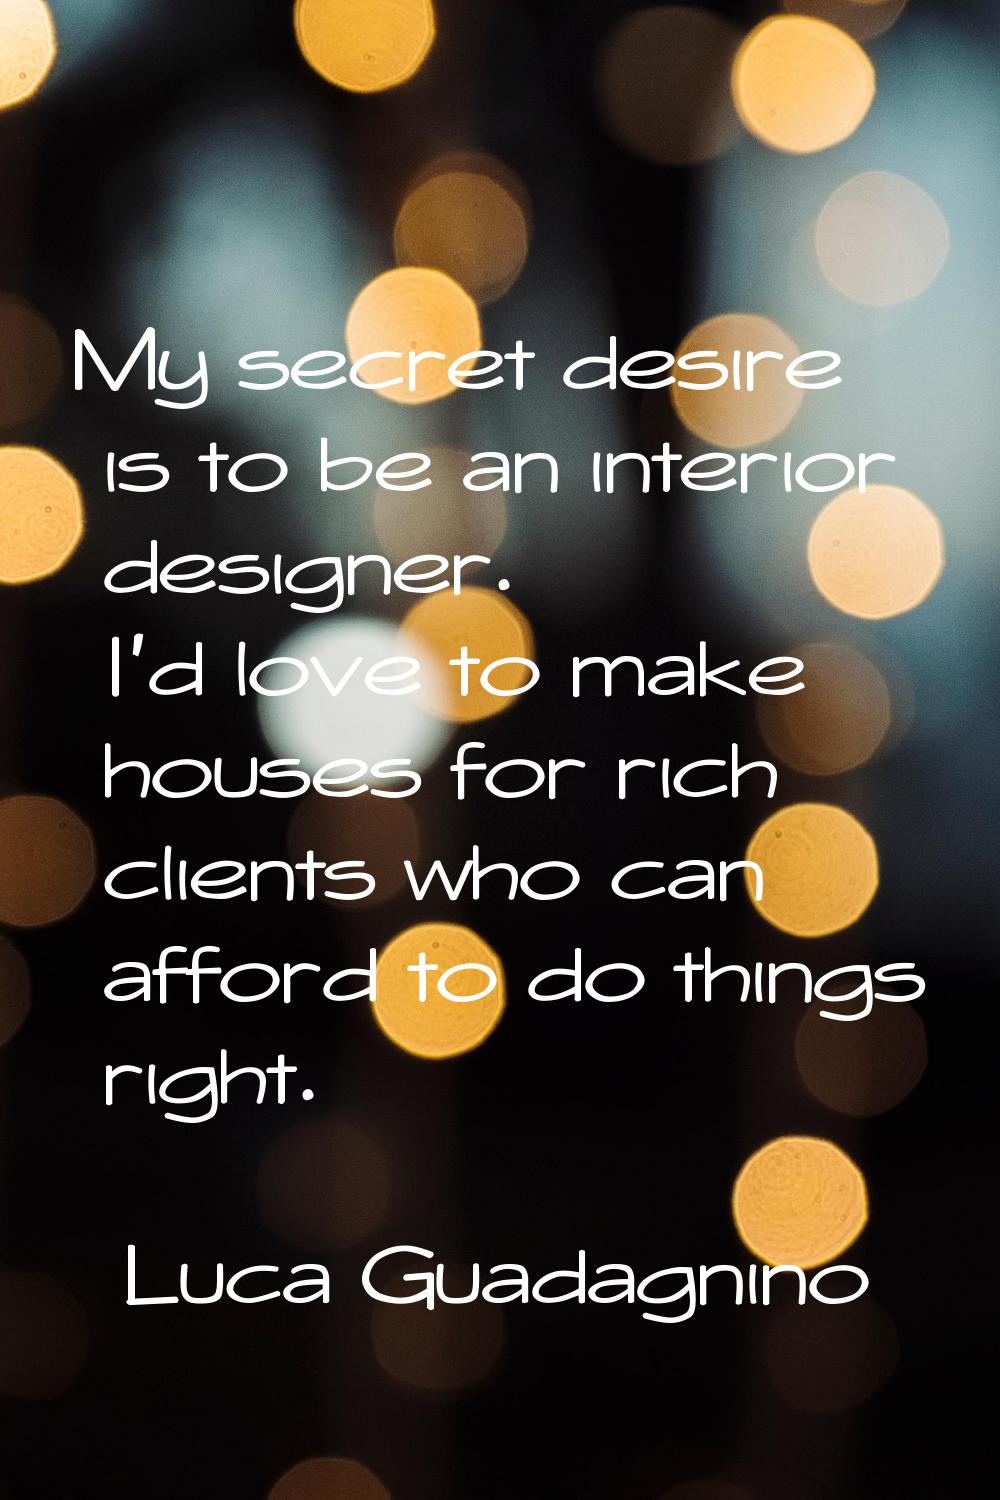 My secret desire is to be an interior designer. I'd love to make houses for rich clients who can af